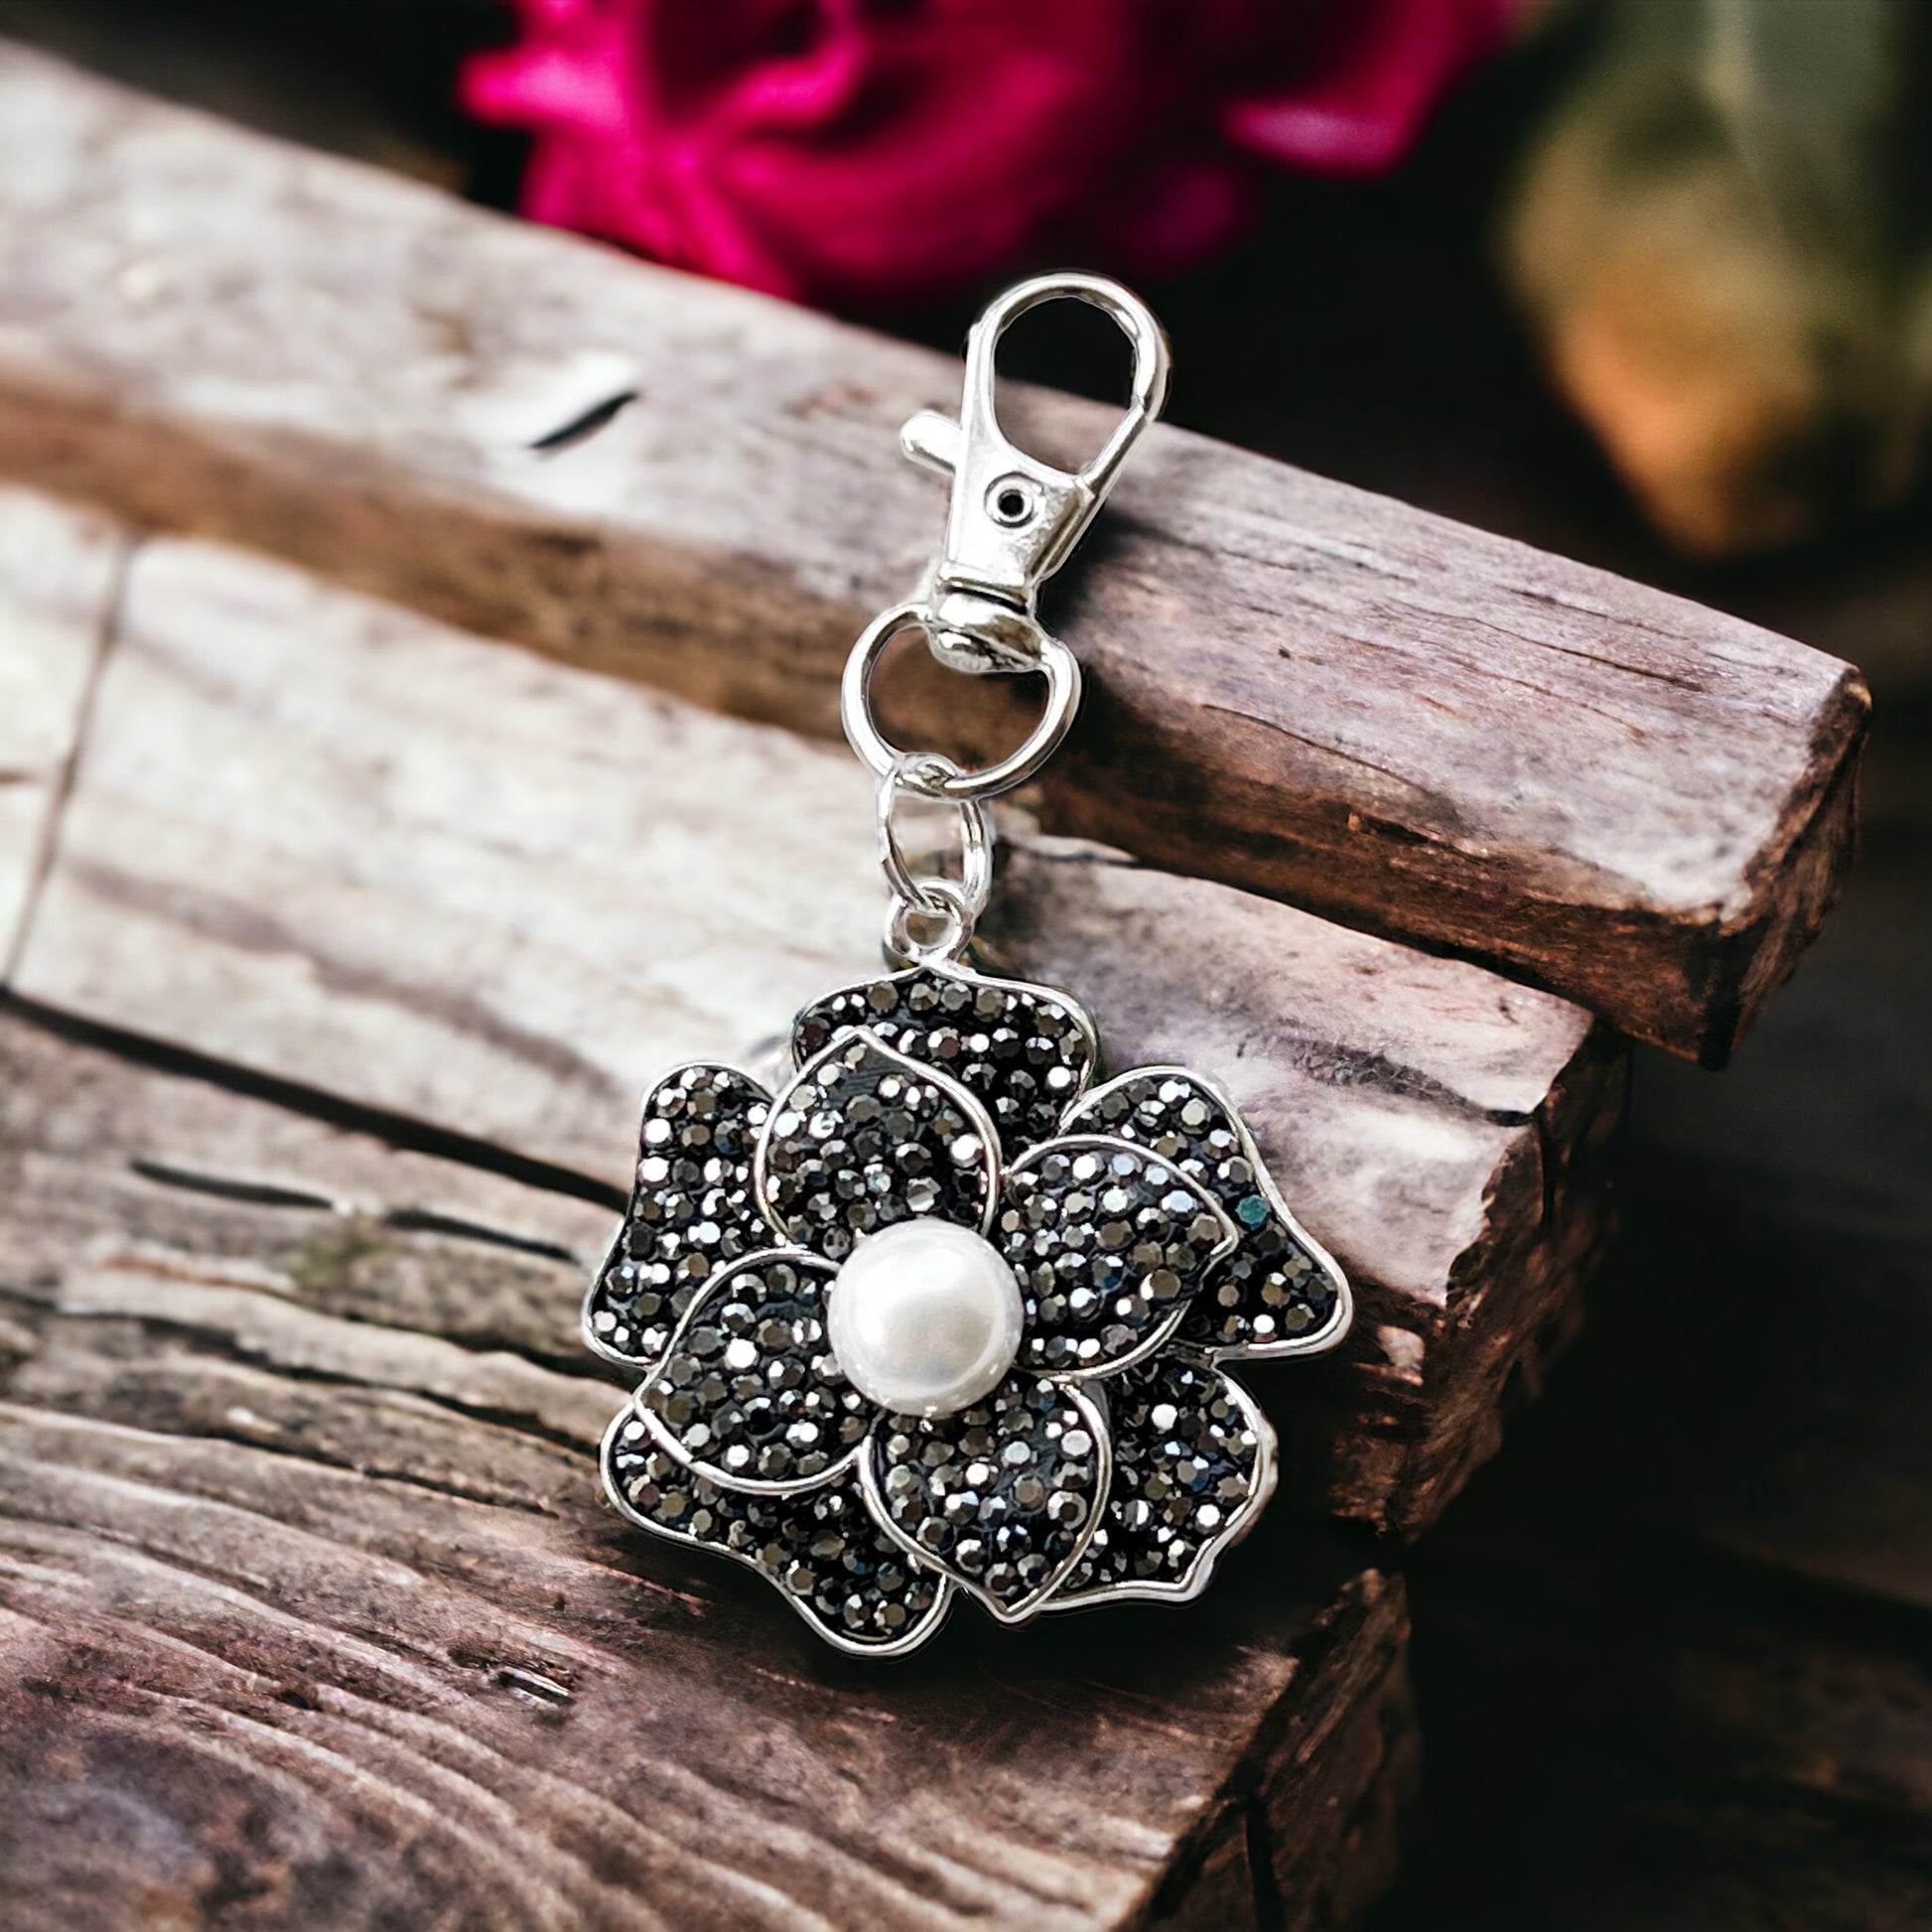 Flower Purse Charm with Rhinestones & Pearl: Elegant Accessory for Your Bag